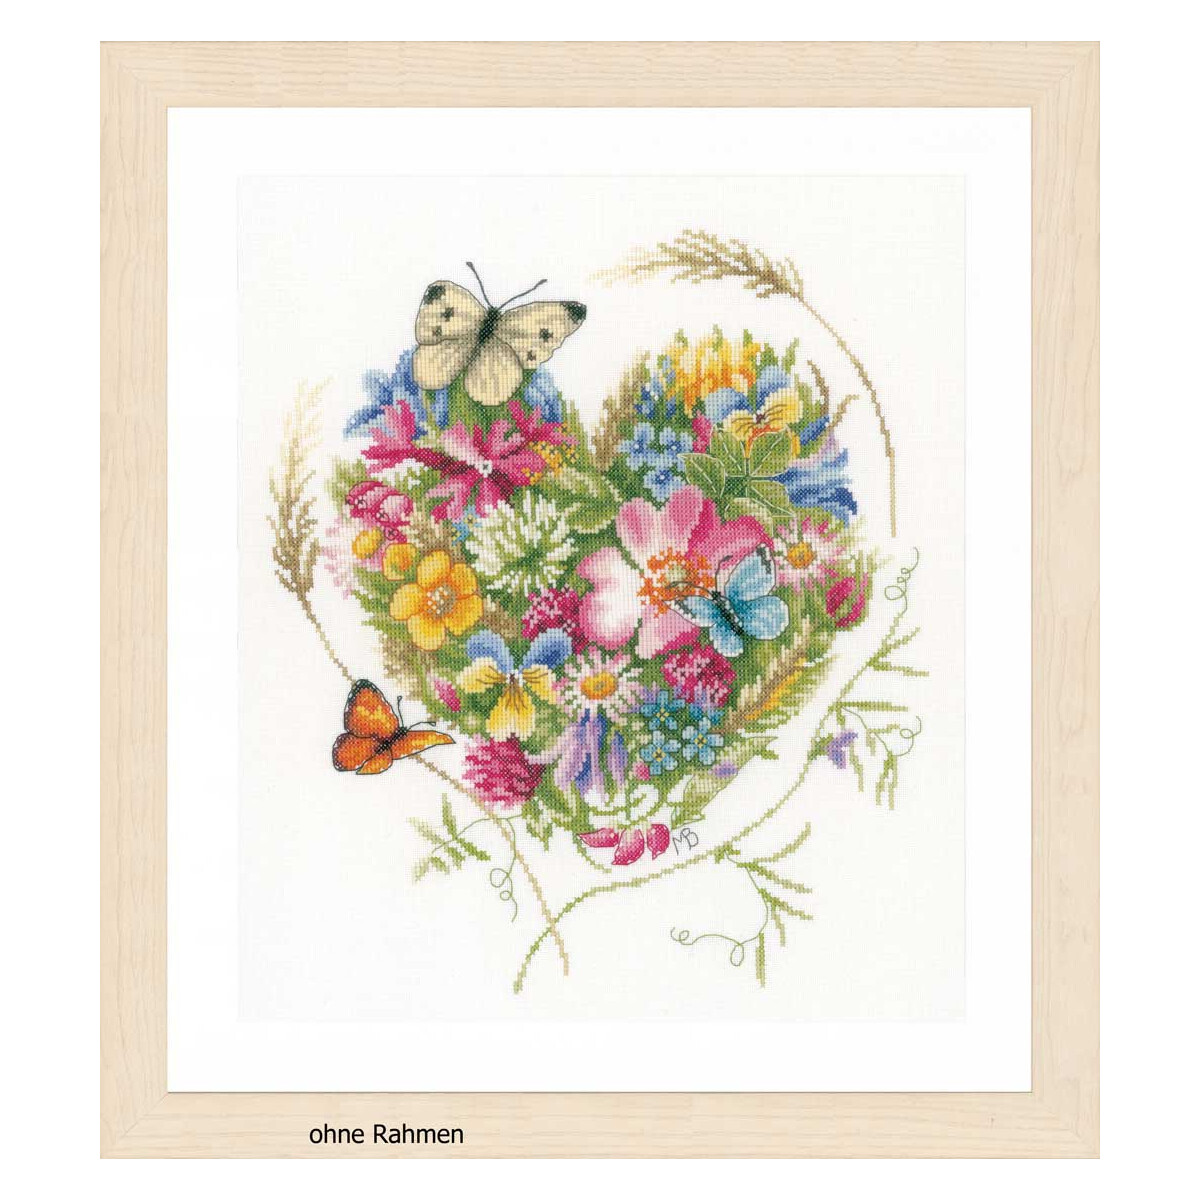 A framed embroidery, made with the Lanarte embroidery...